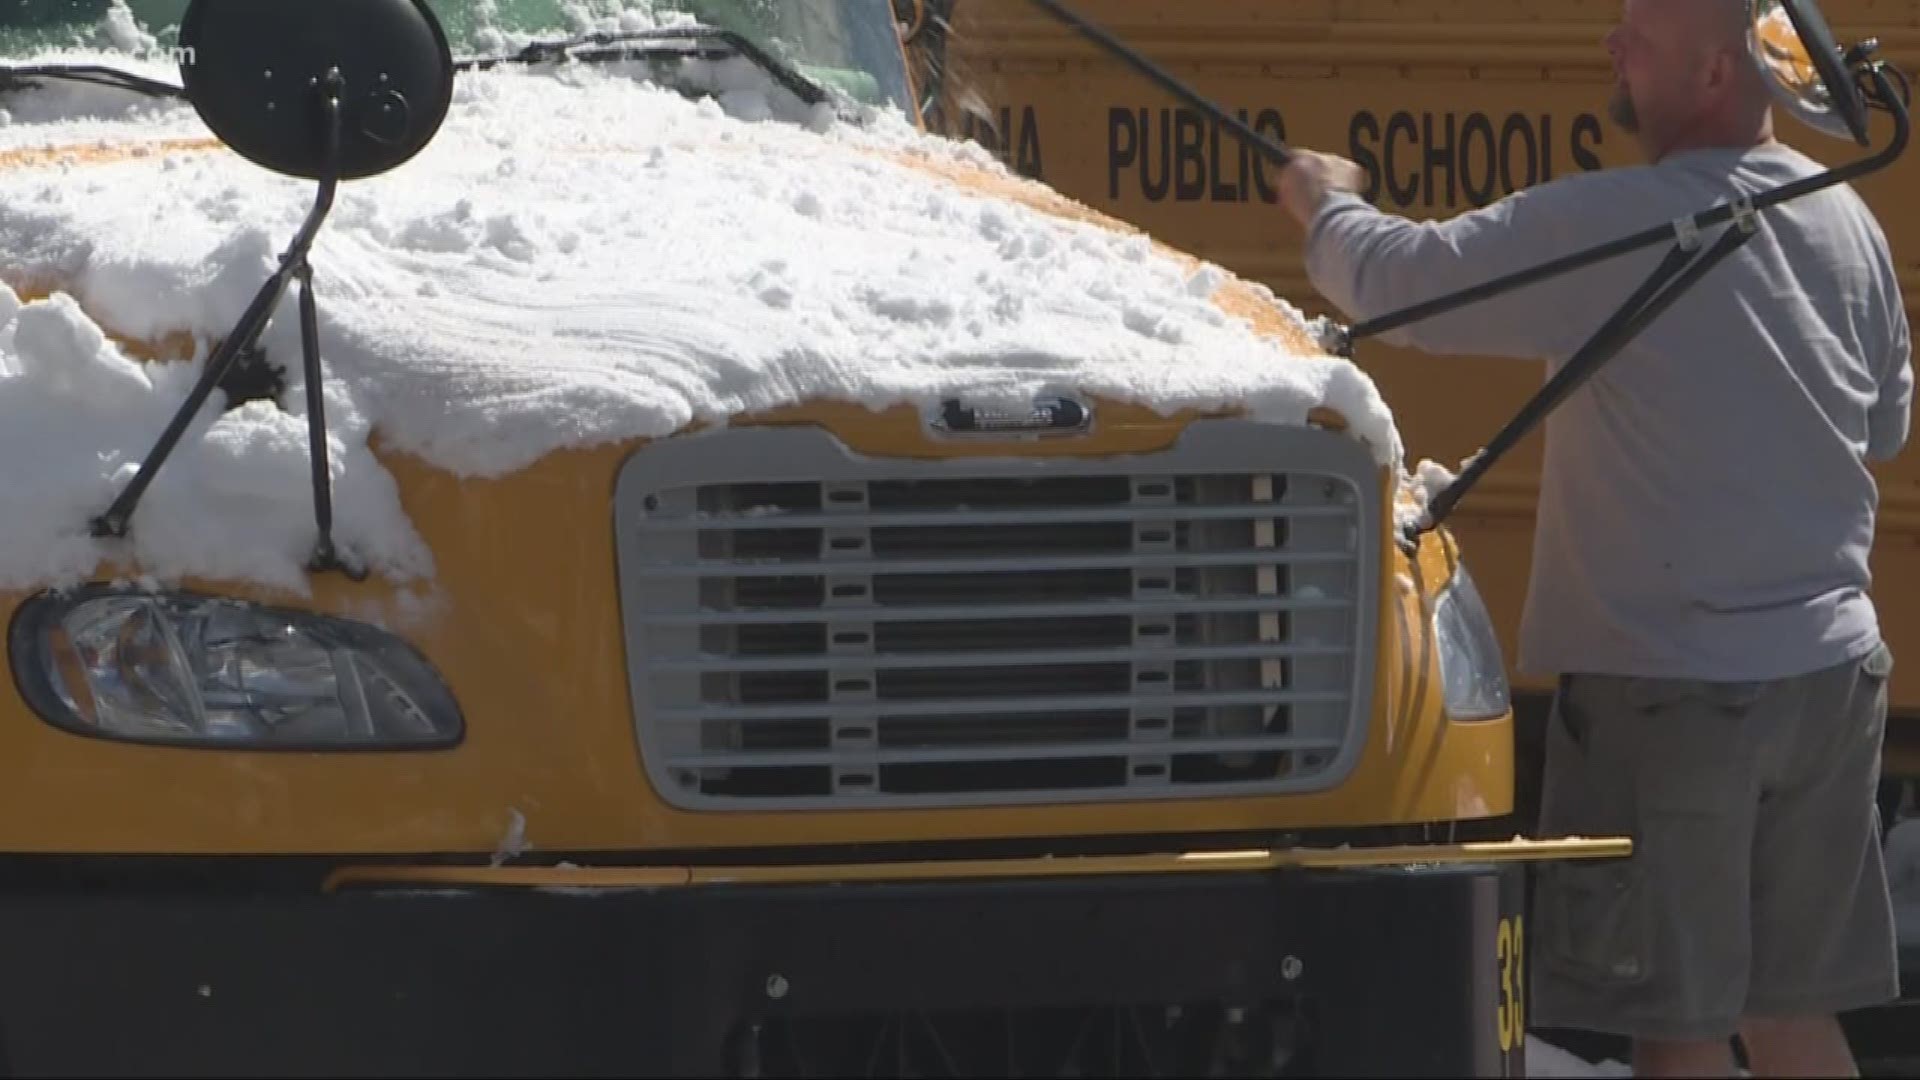 A South Carolina school district has a new approach to snow days.